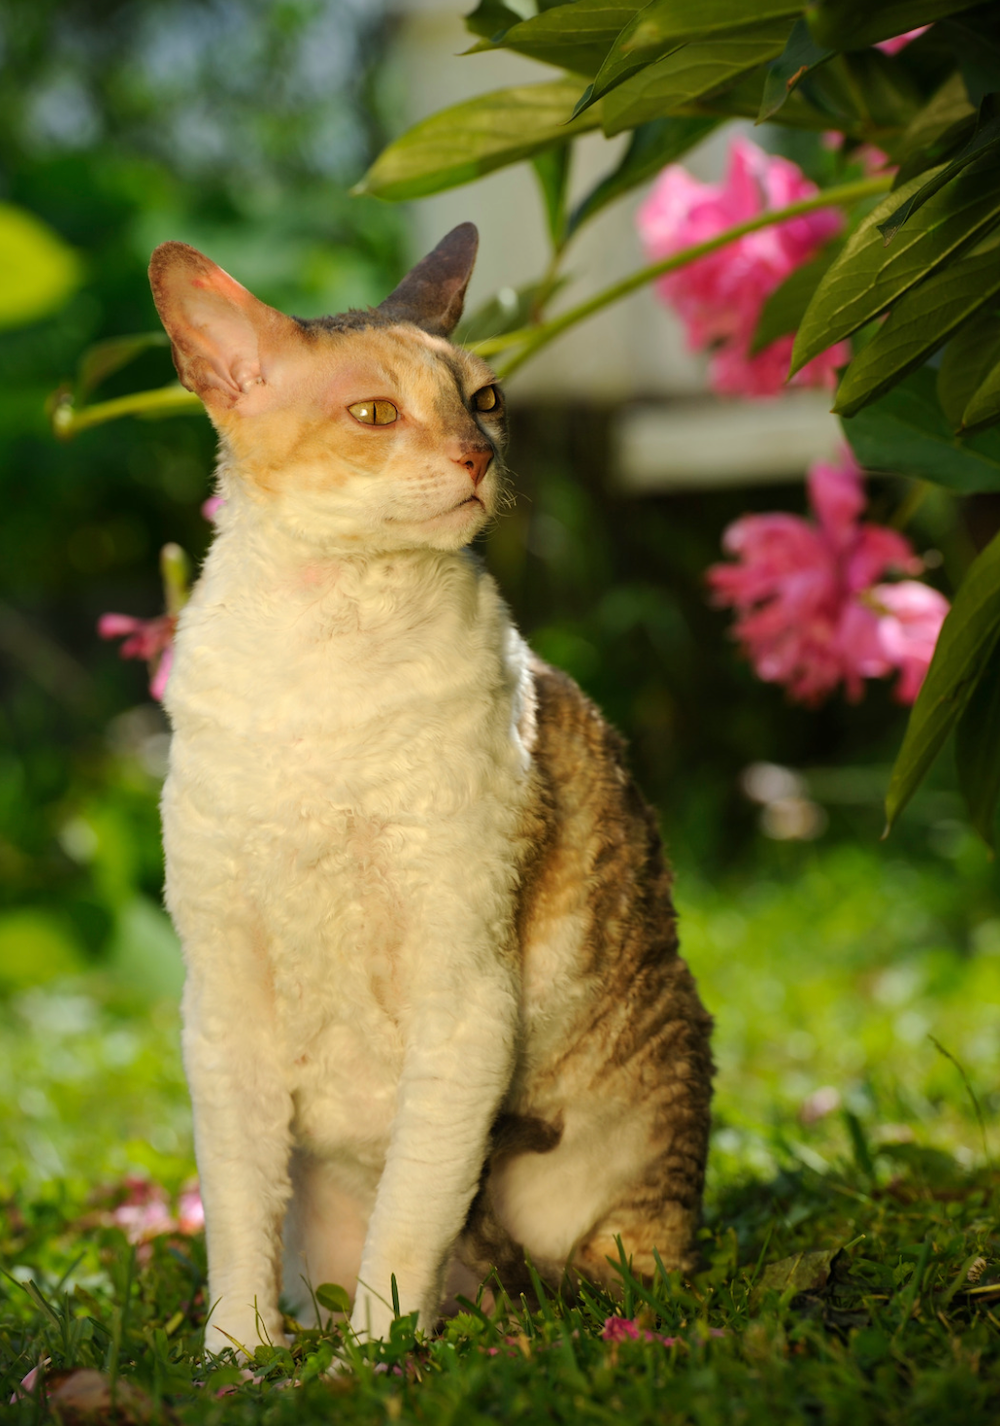 orange and white tabby Cornish Rex smelling flowers